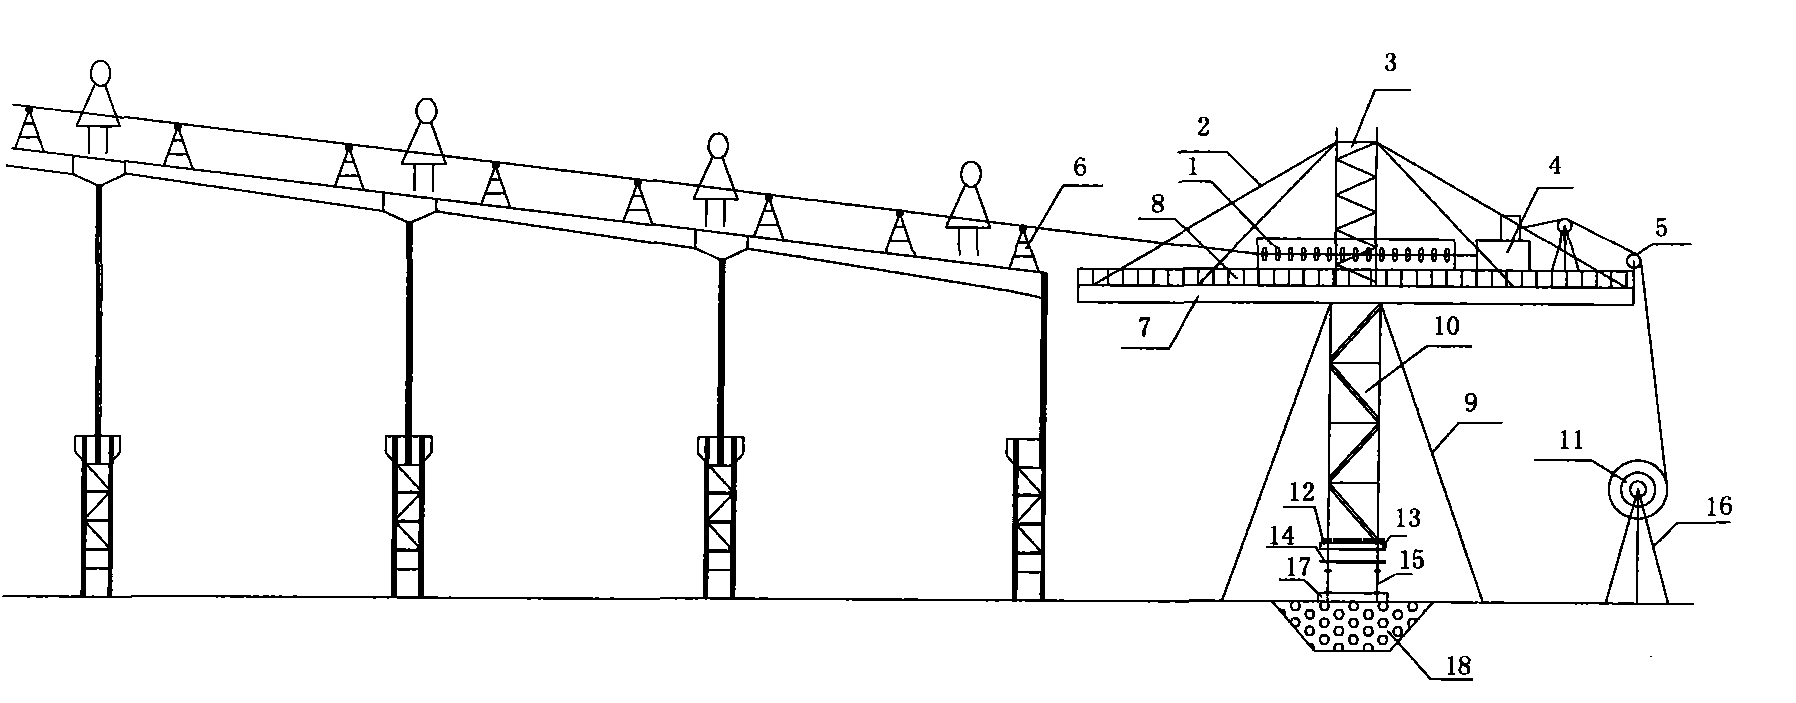 Method for manufacturing and mounting 120-meter long roof tile at high altitude